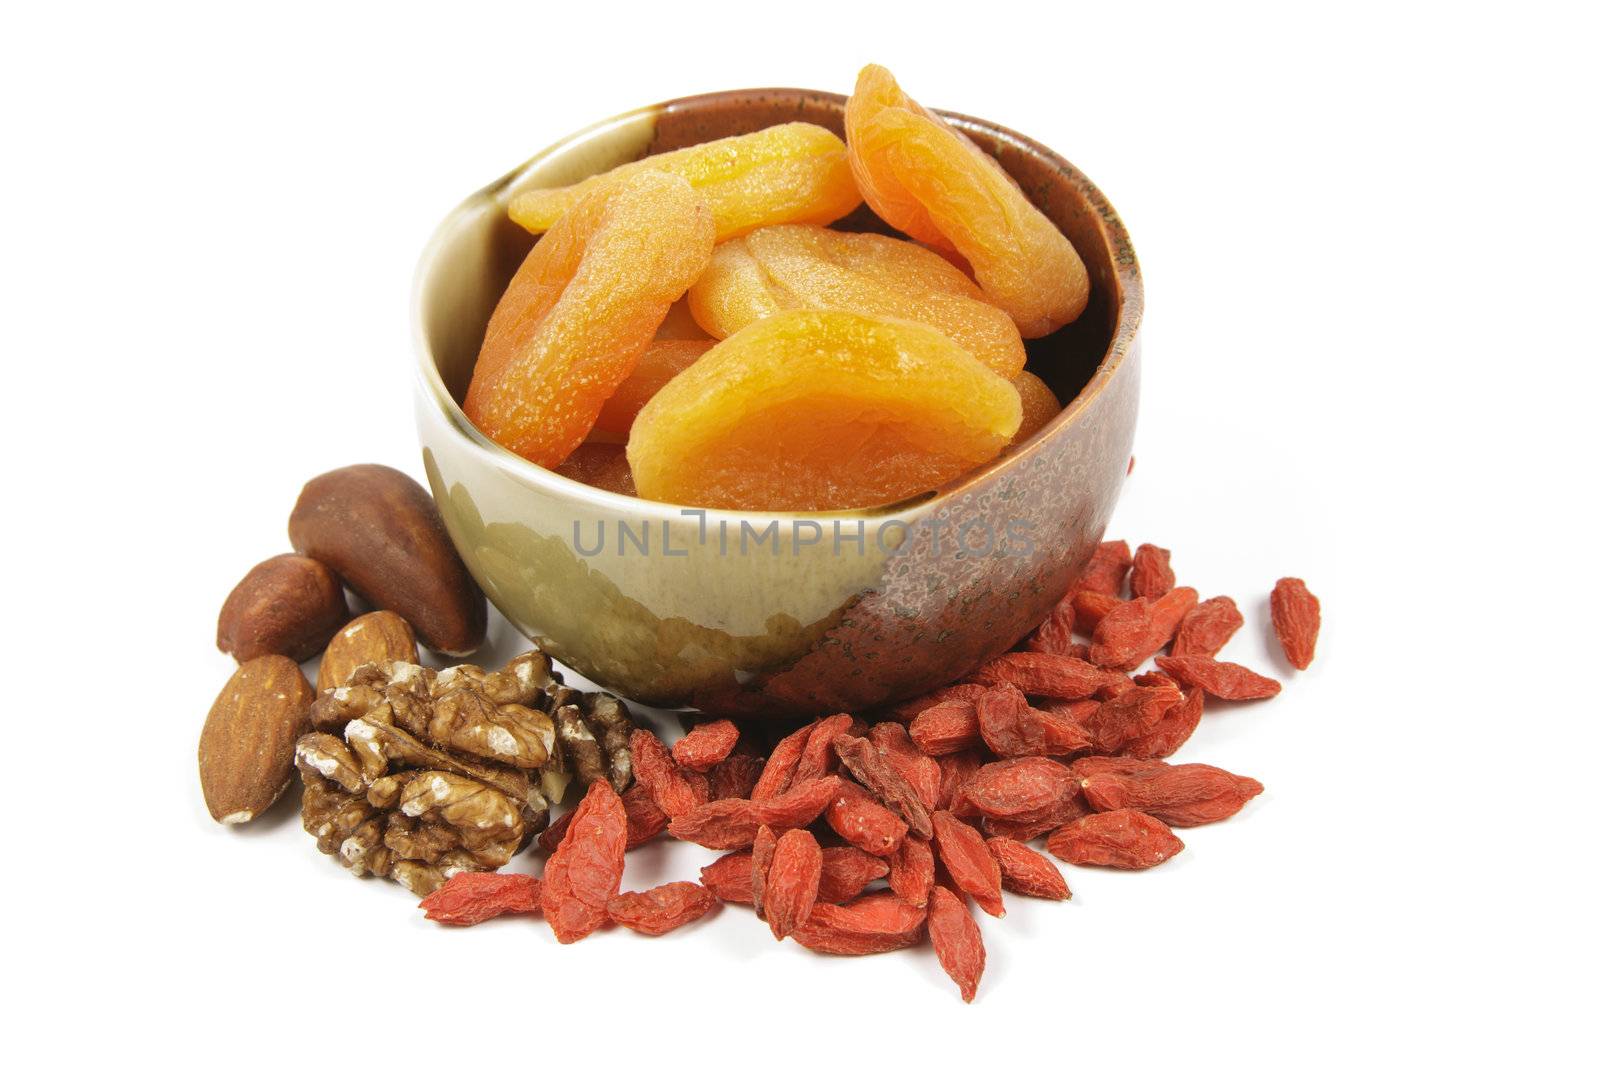 Dried juicy orange apricots in a green and brown bowl with mixed nuts and goji berries on a reflective white background